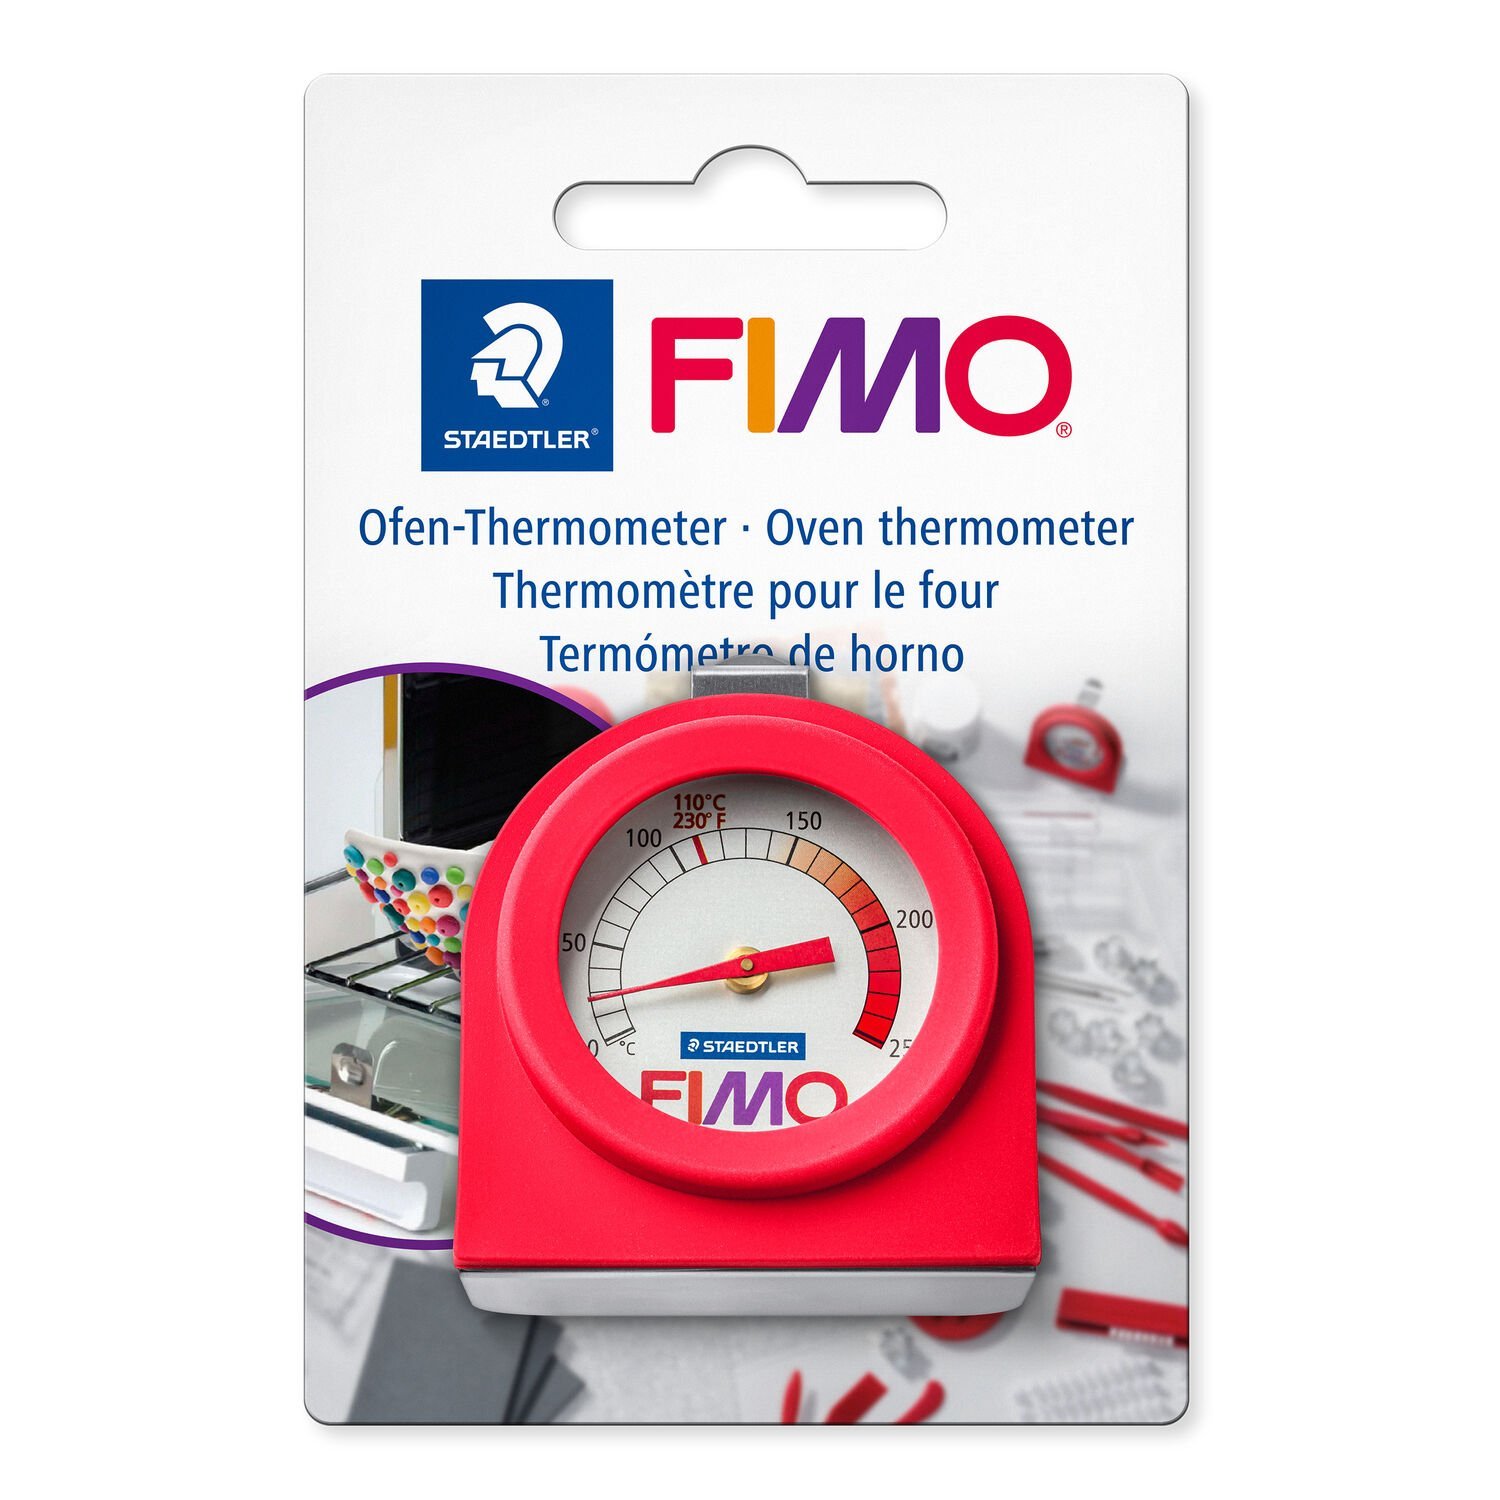 FIMO Staedtler 8700 22 Fimo Oven Thermometer Same day Dispatch Order Before 2PM 4007817018187 